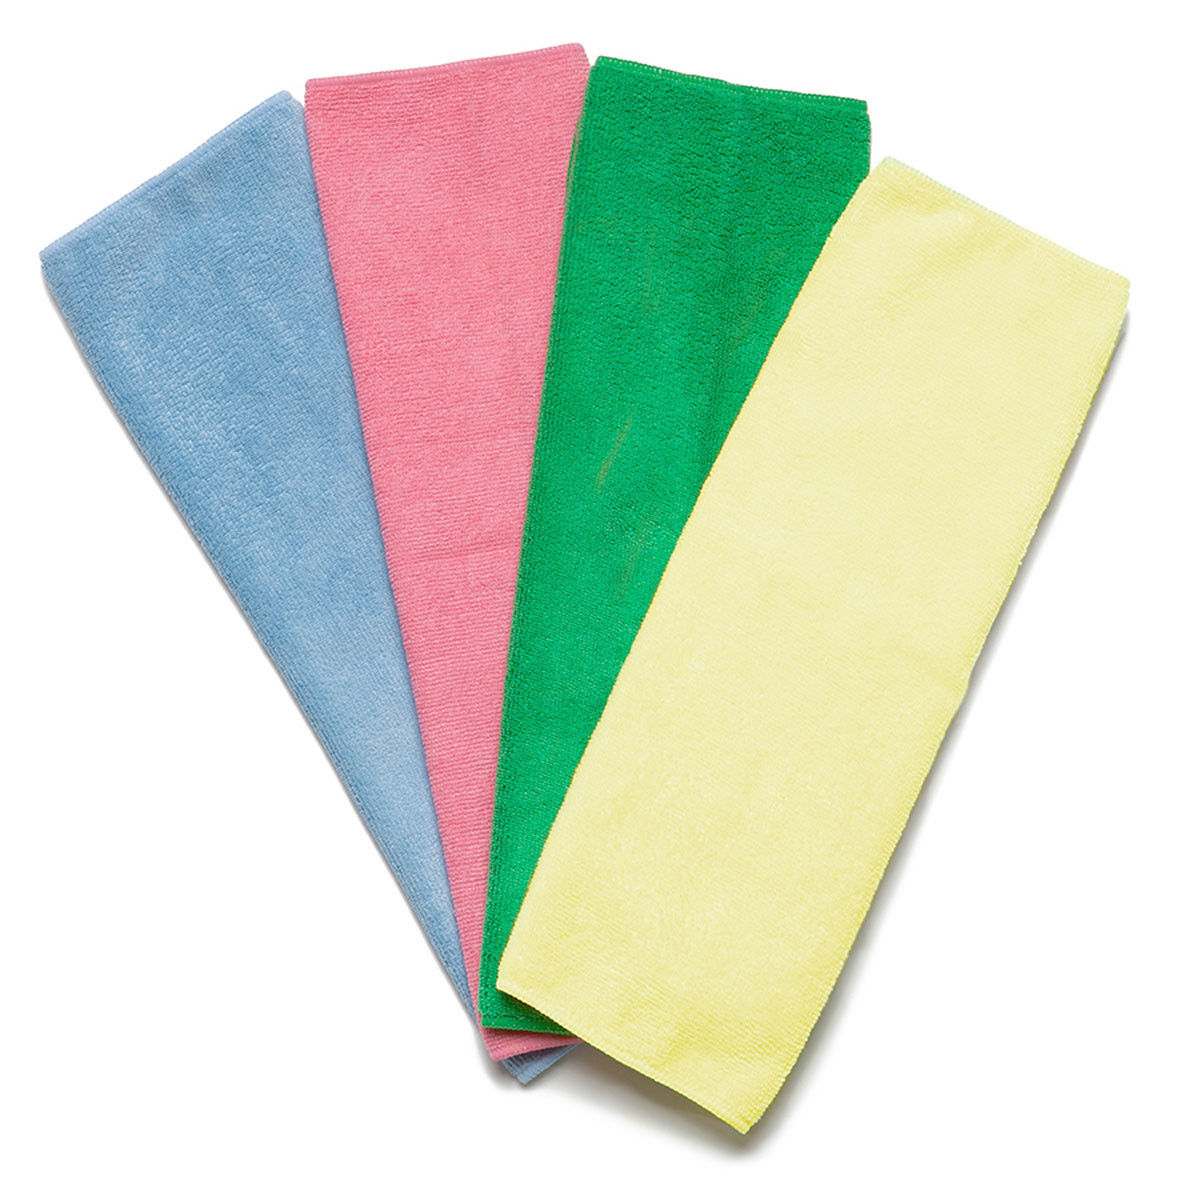 Microfiber 12 x 12 Cleaning Towels, 250 GSM Questions & Answers